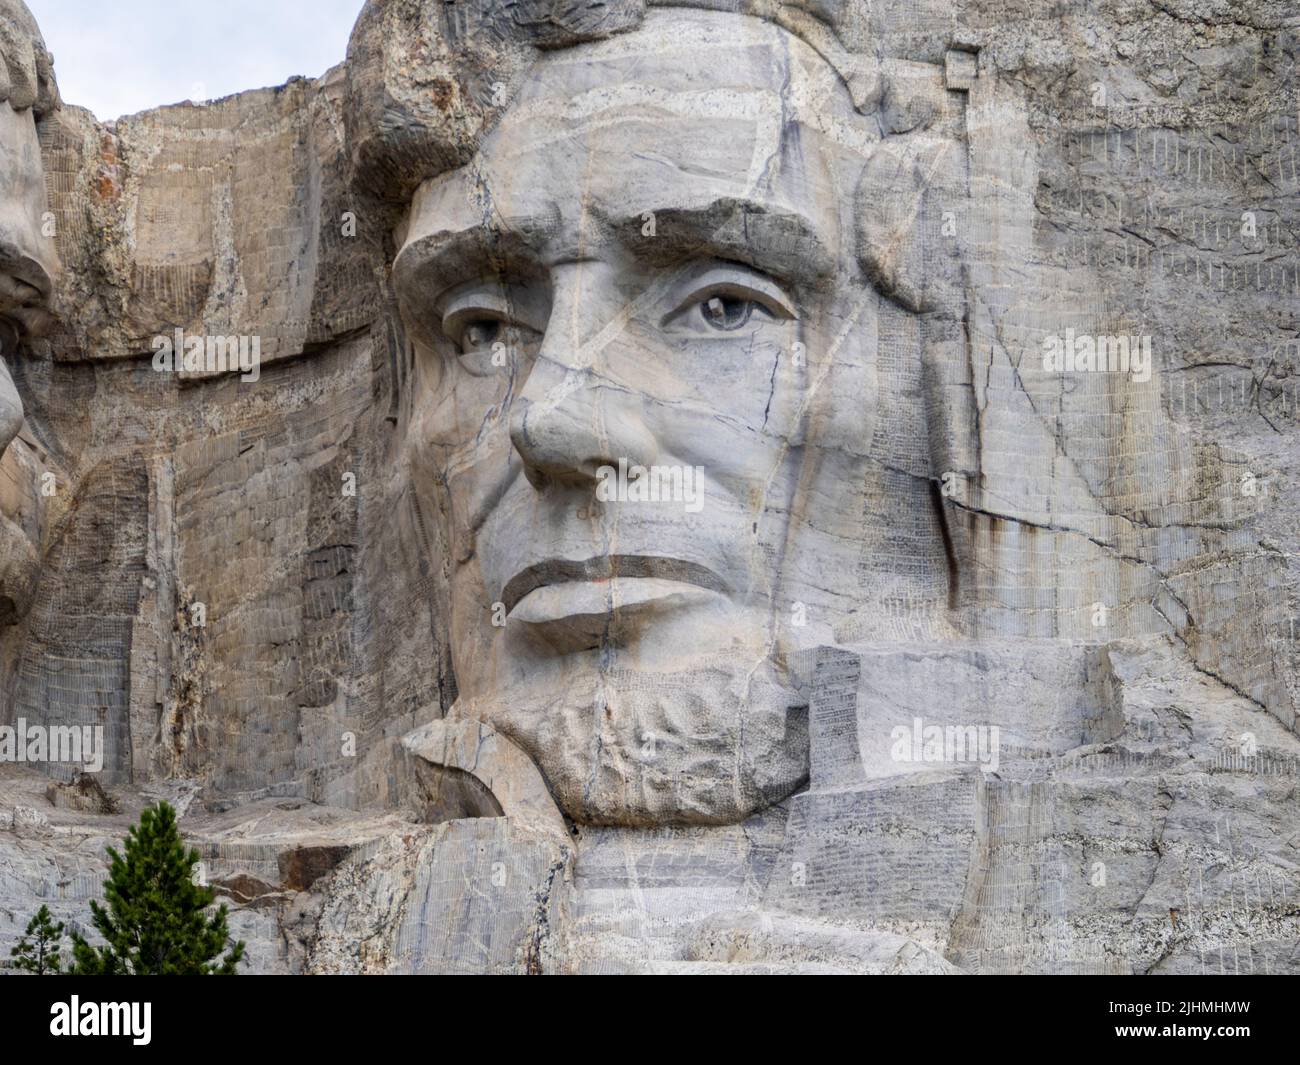 Close-up of Abraham, Lincoln sculpture at Mount Rushmore National Memorial in the Black Hills of South Dakota USA Stock Photo